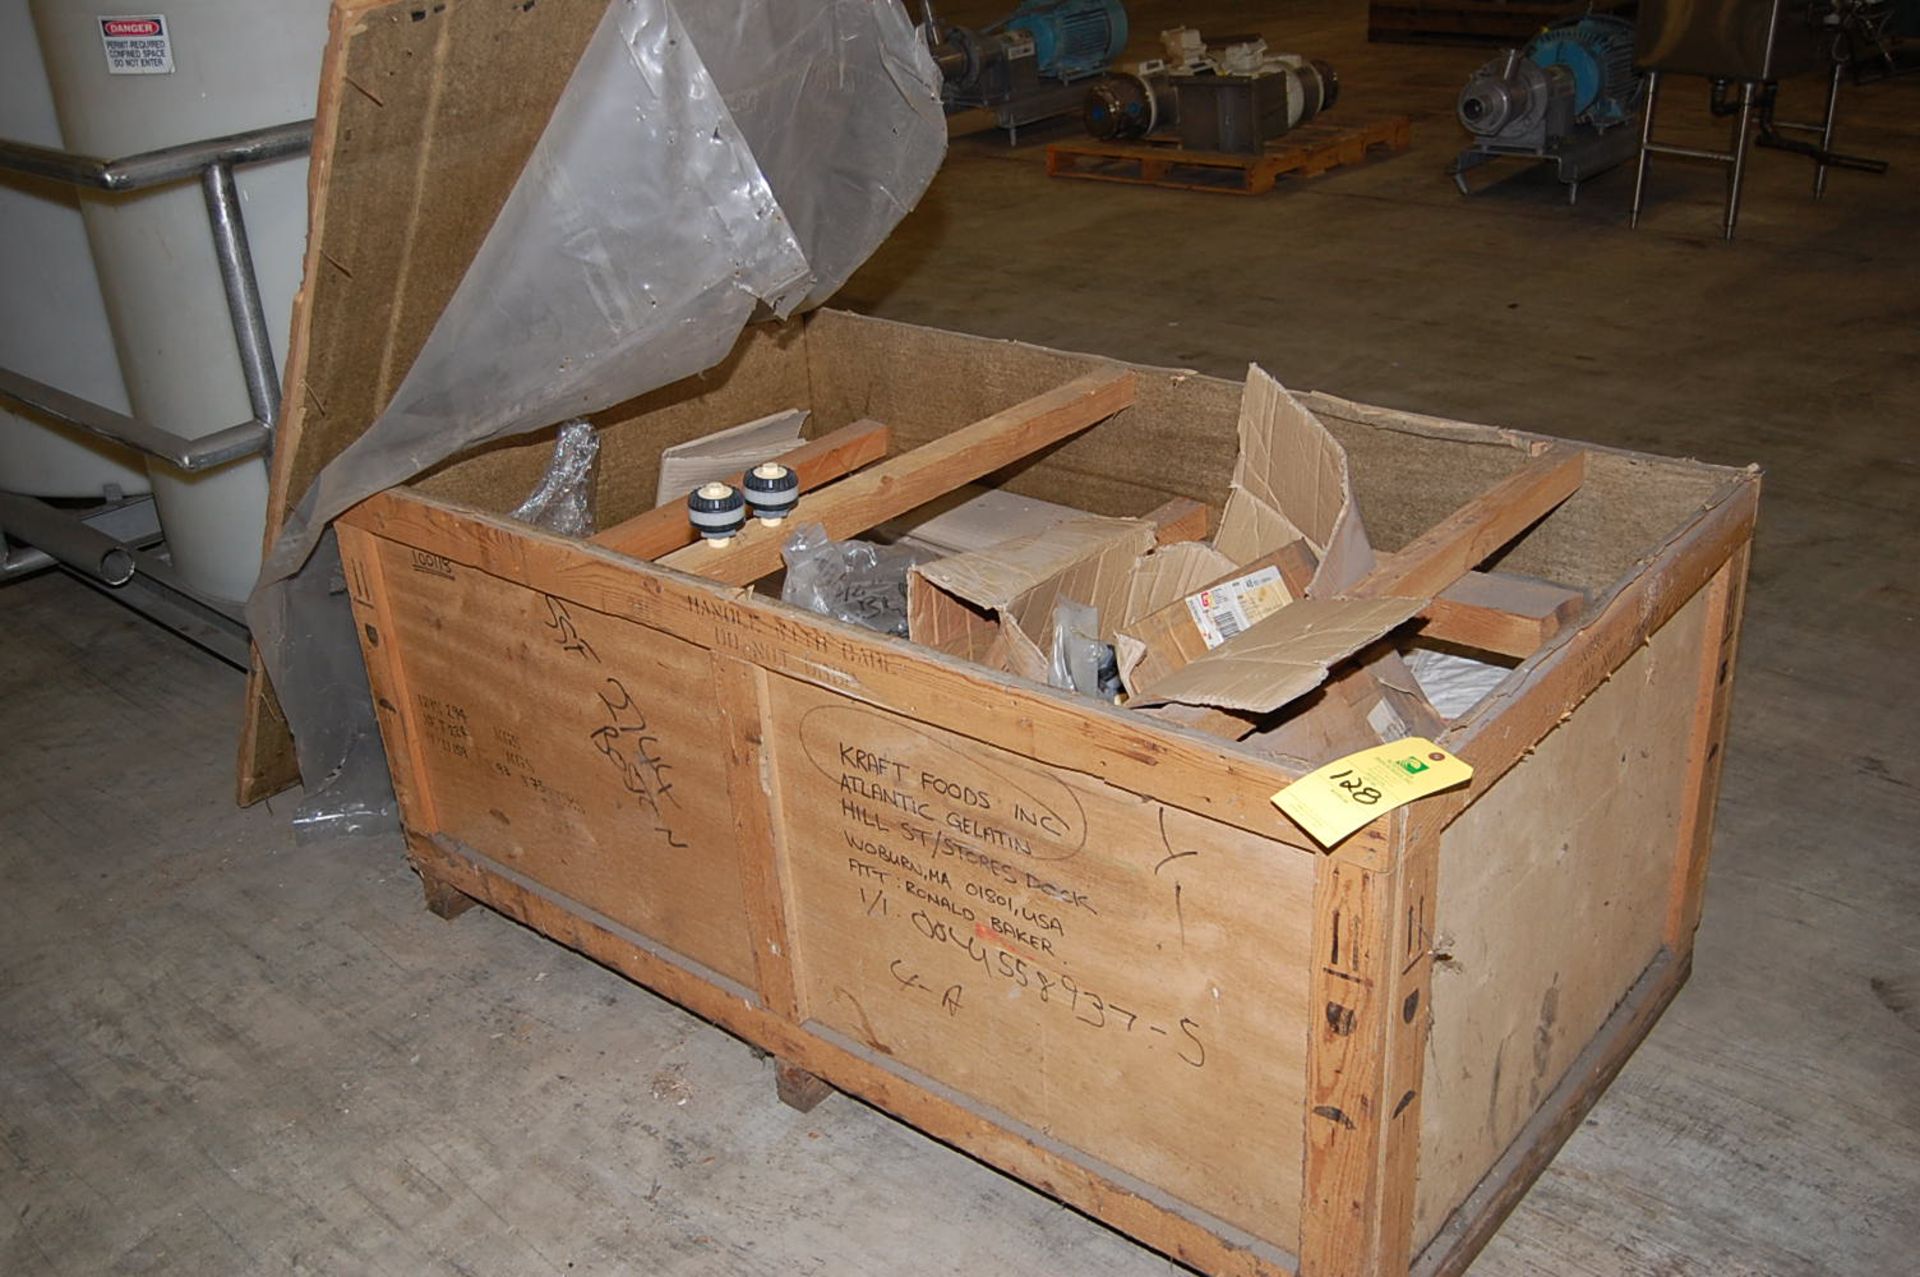 Crate - SS Parts & Components, Assorted Plugs, Washers, Stainless Steel Clamps - Rigging Fee $50, I